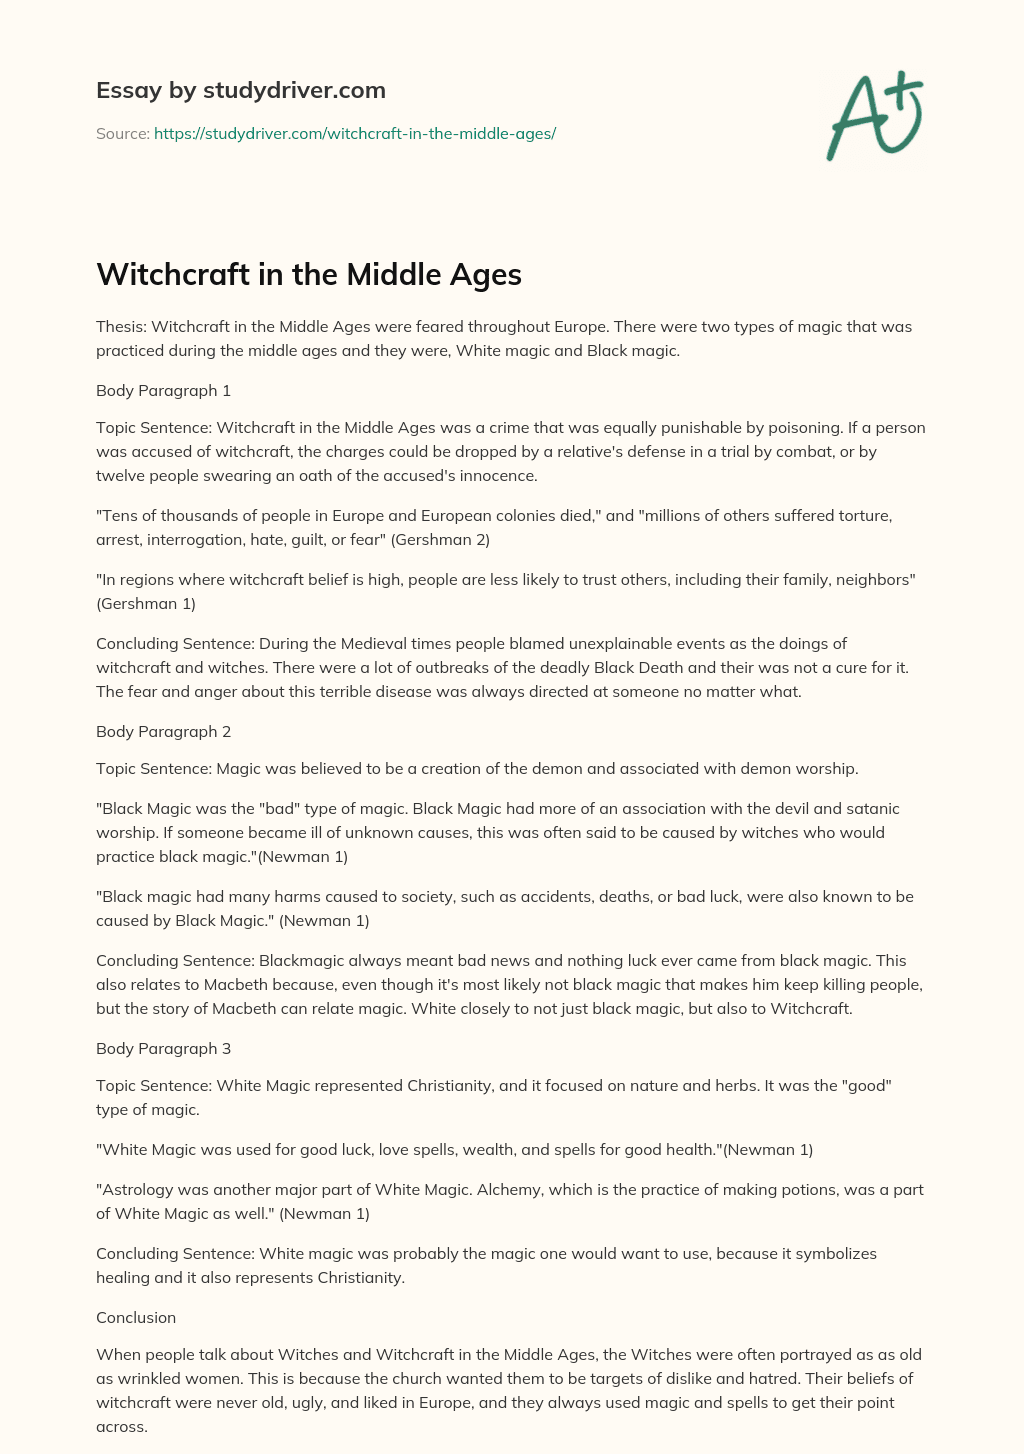 Witchcraft in the Middle Ages essay